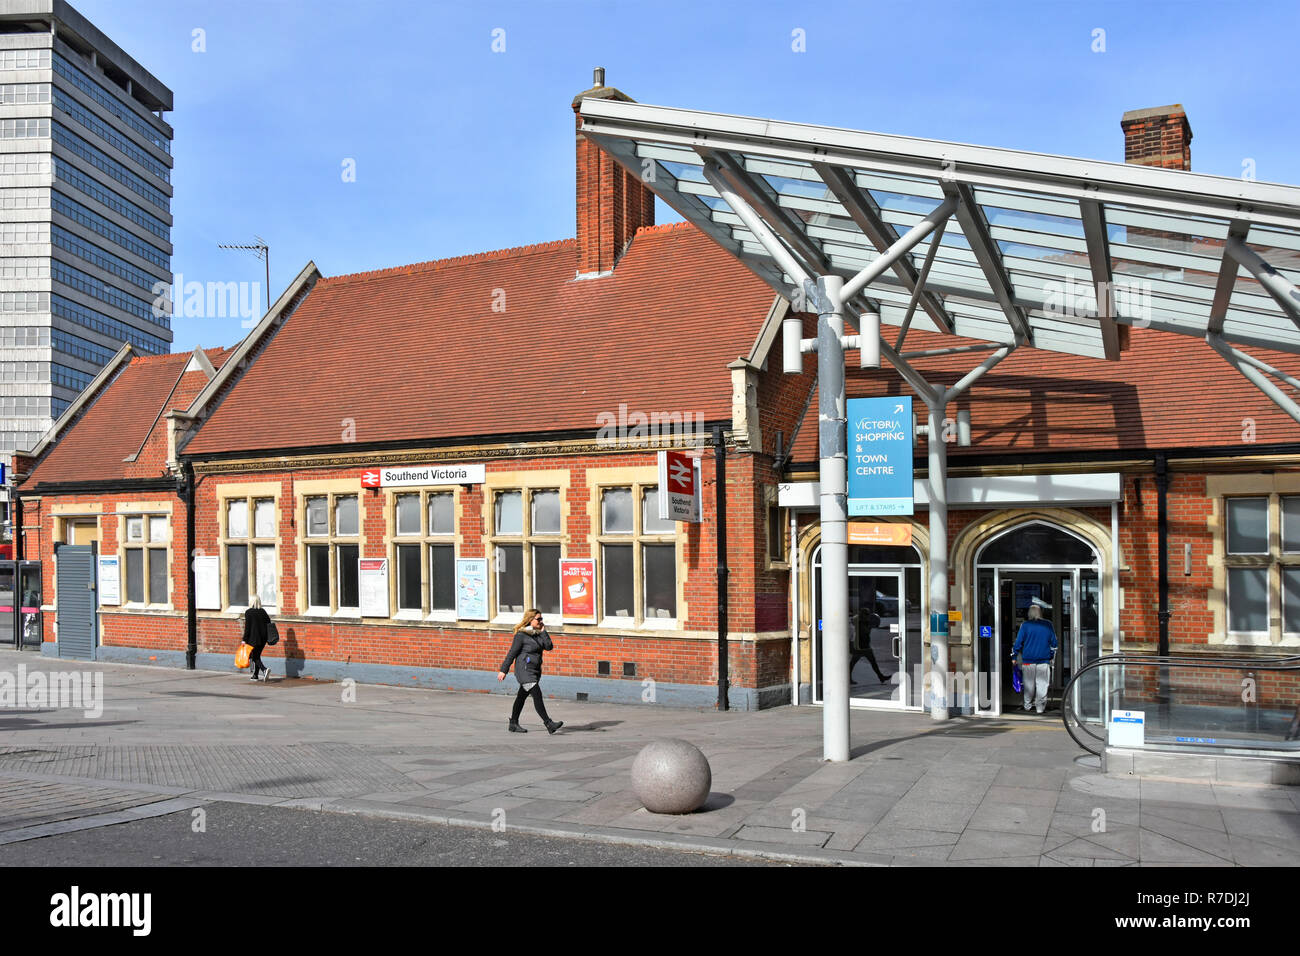 Façade entrance to Southend Victoria railway station passenger access to public transport Greater Anglia train routes to London from  Essex England UK Stock Photo